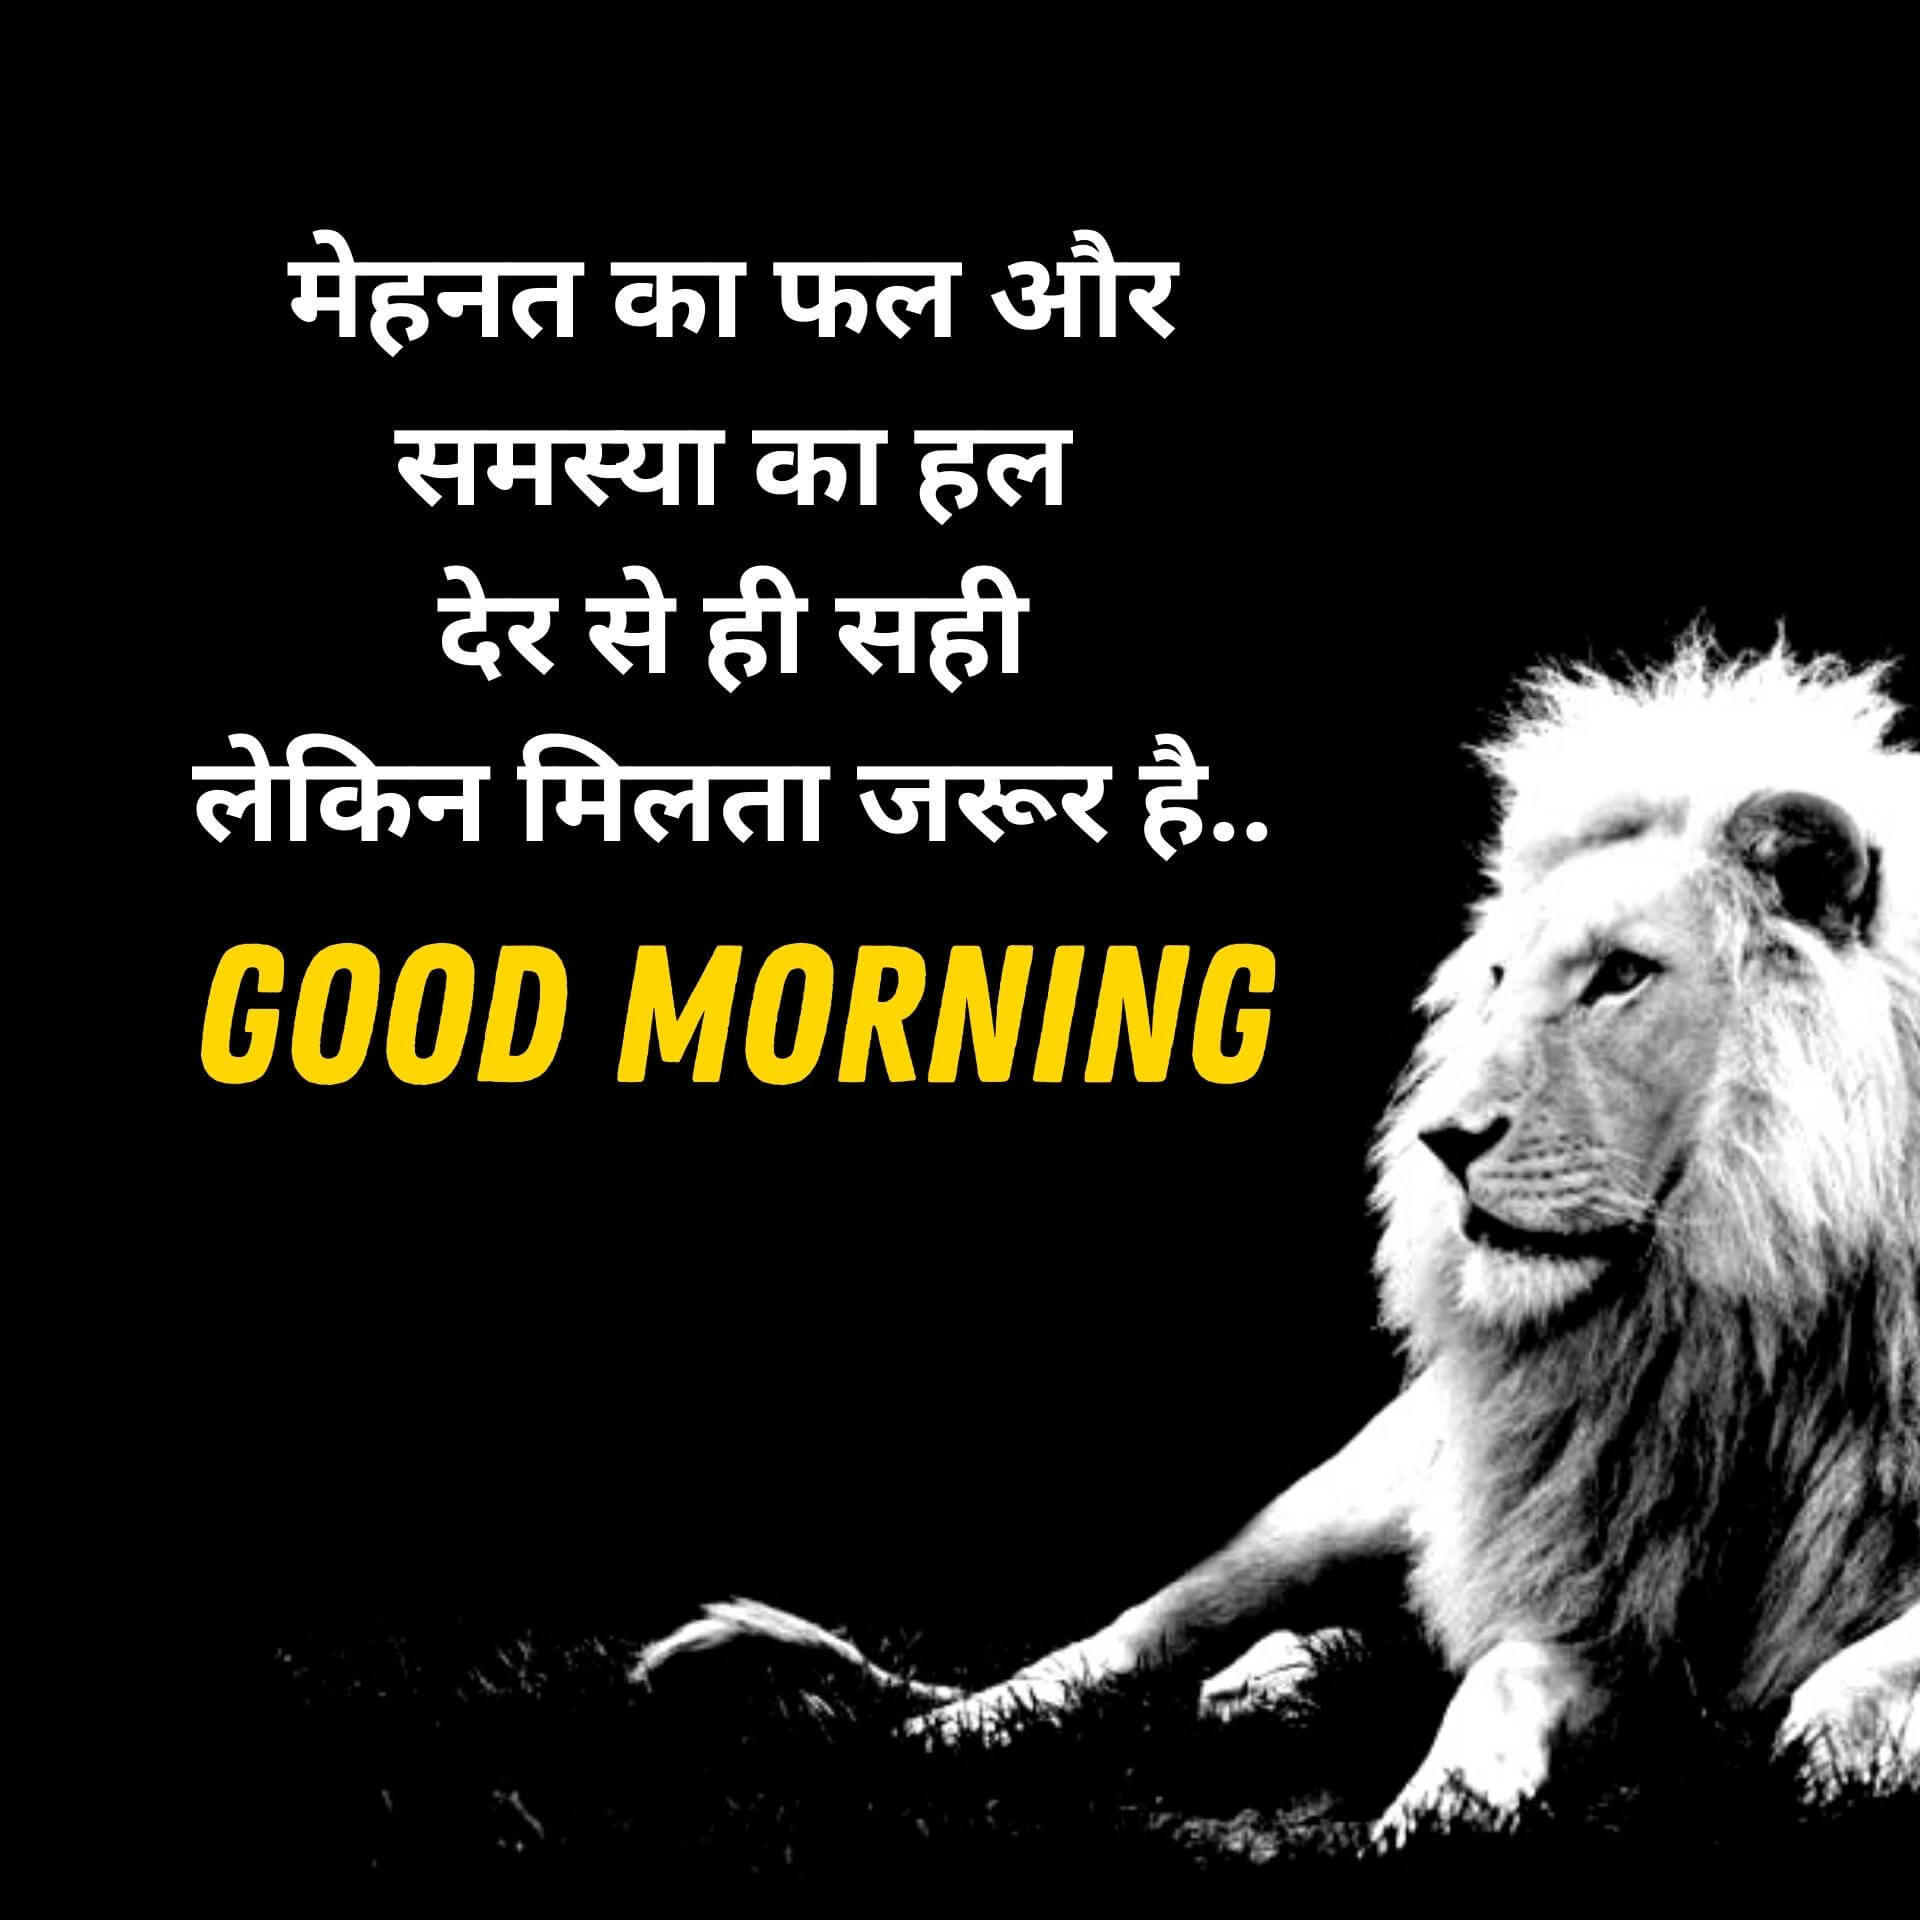 Good Morning Image In Hindi – 300+ Morning Quotes Pictures Photo Download